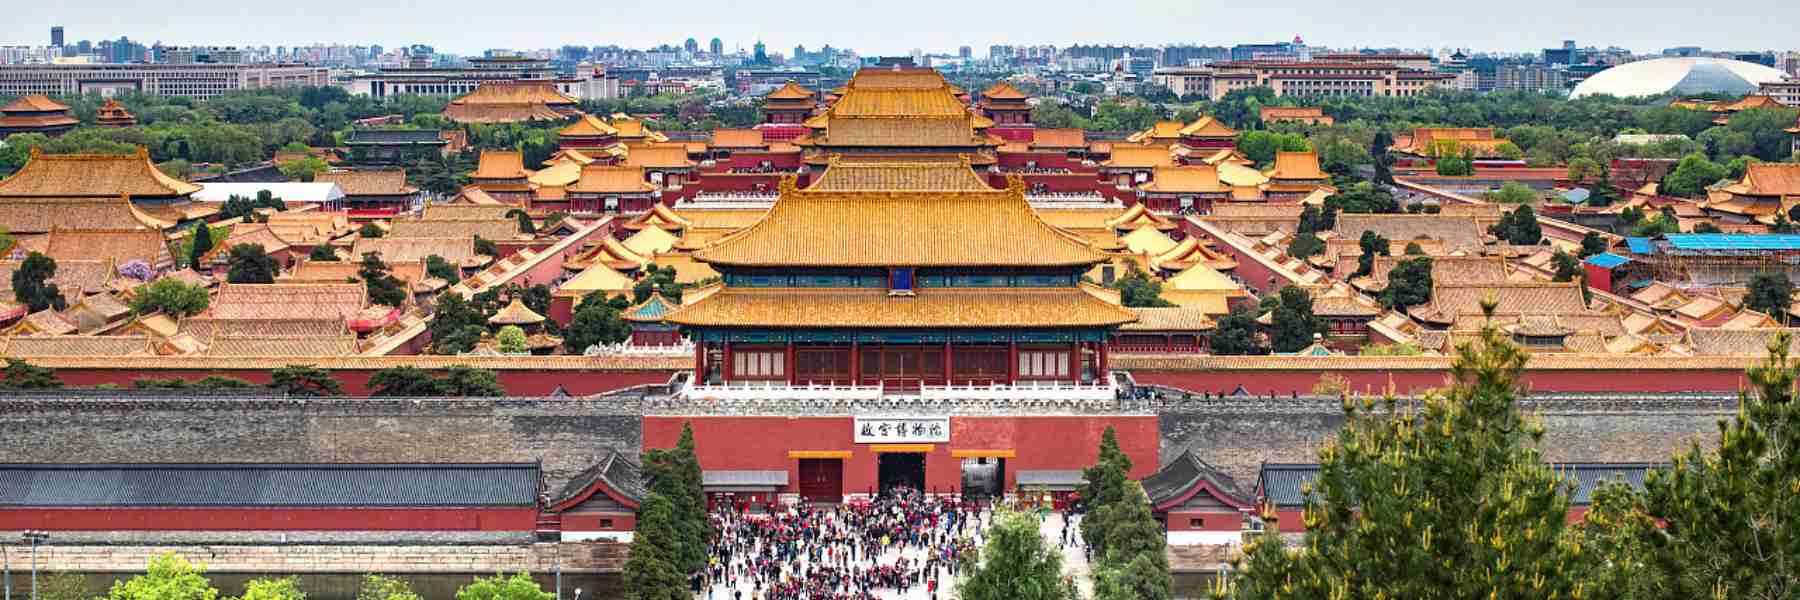 6-Day China Classic Tour of Hong Kong and Beijing